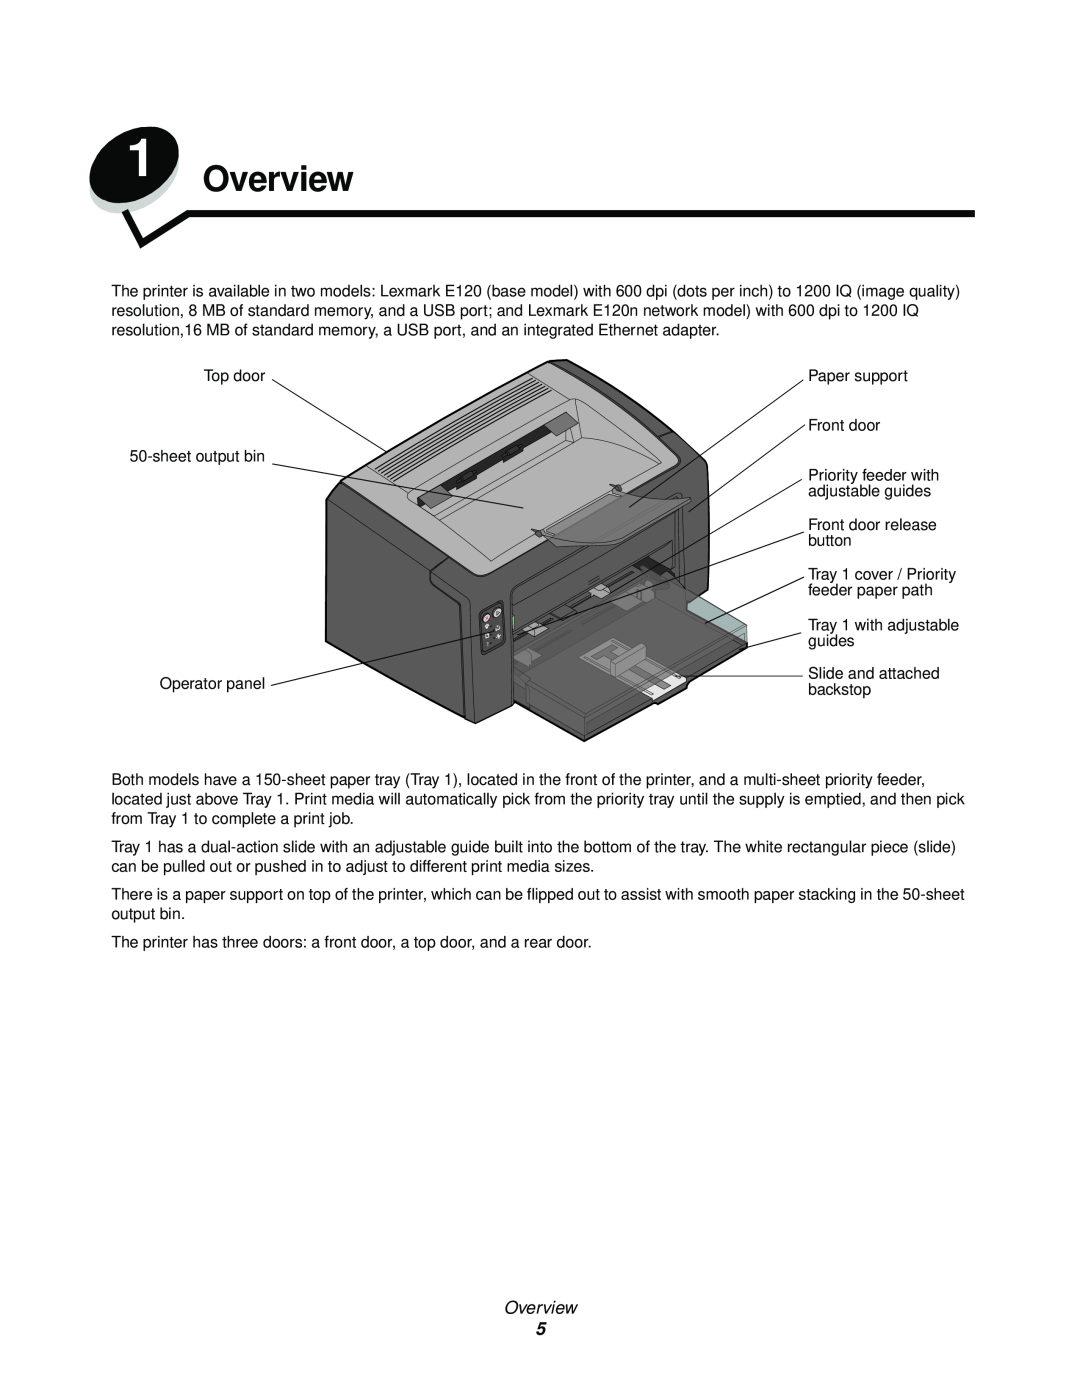 Lexmark 120 manual Overview 